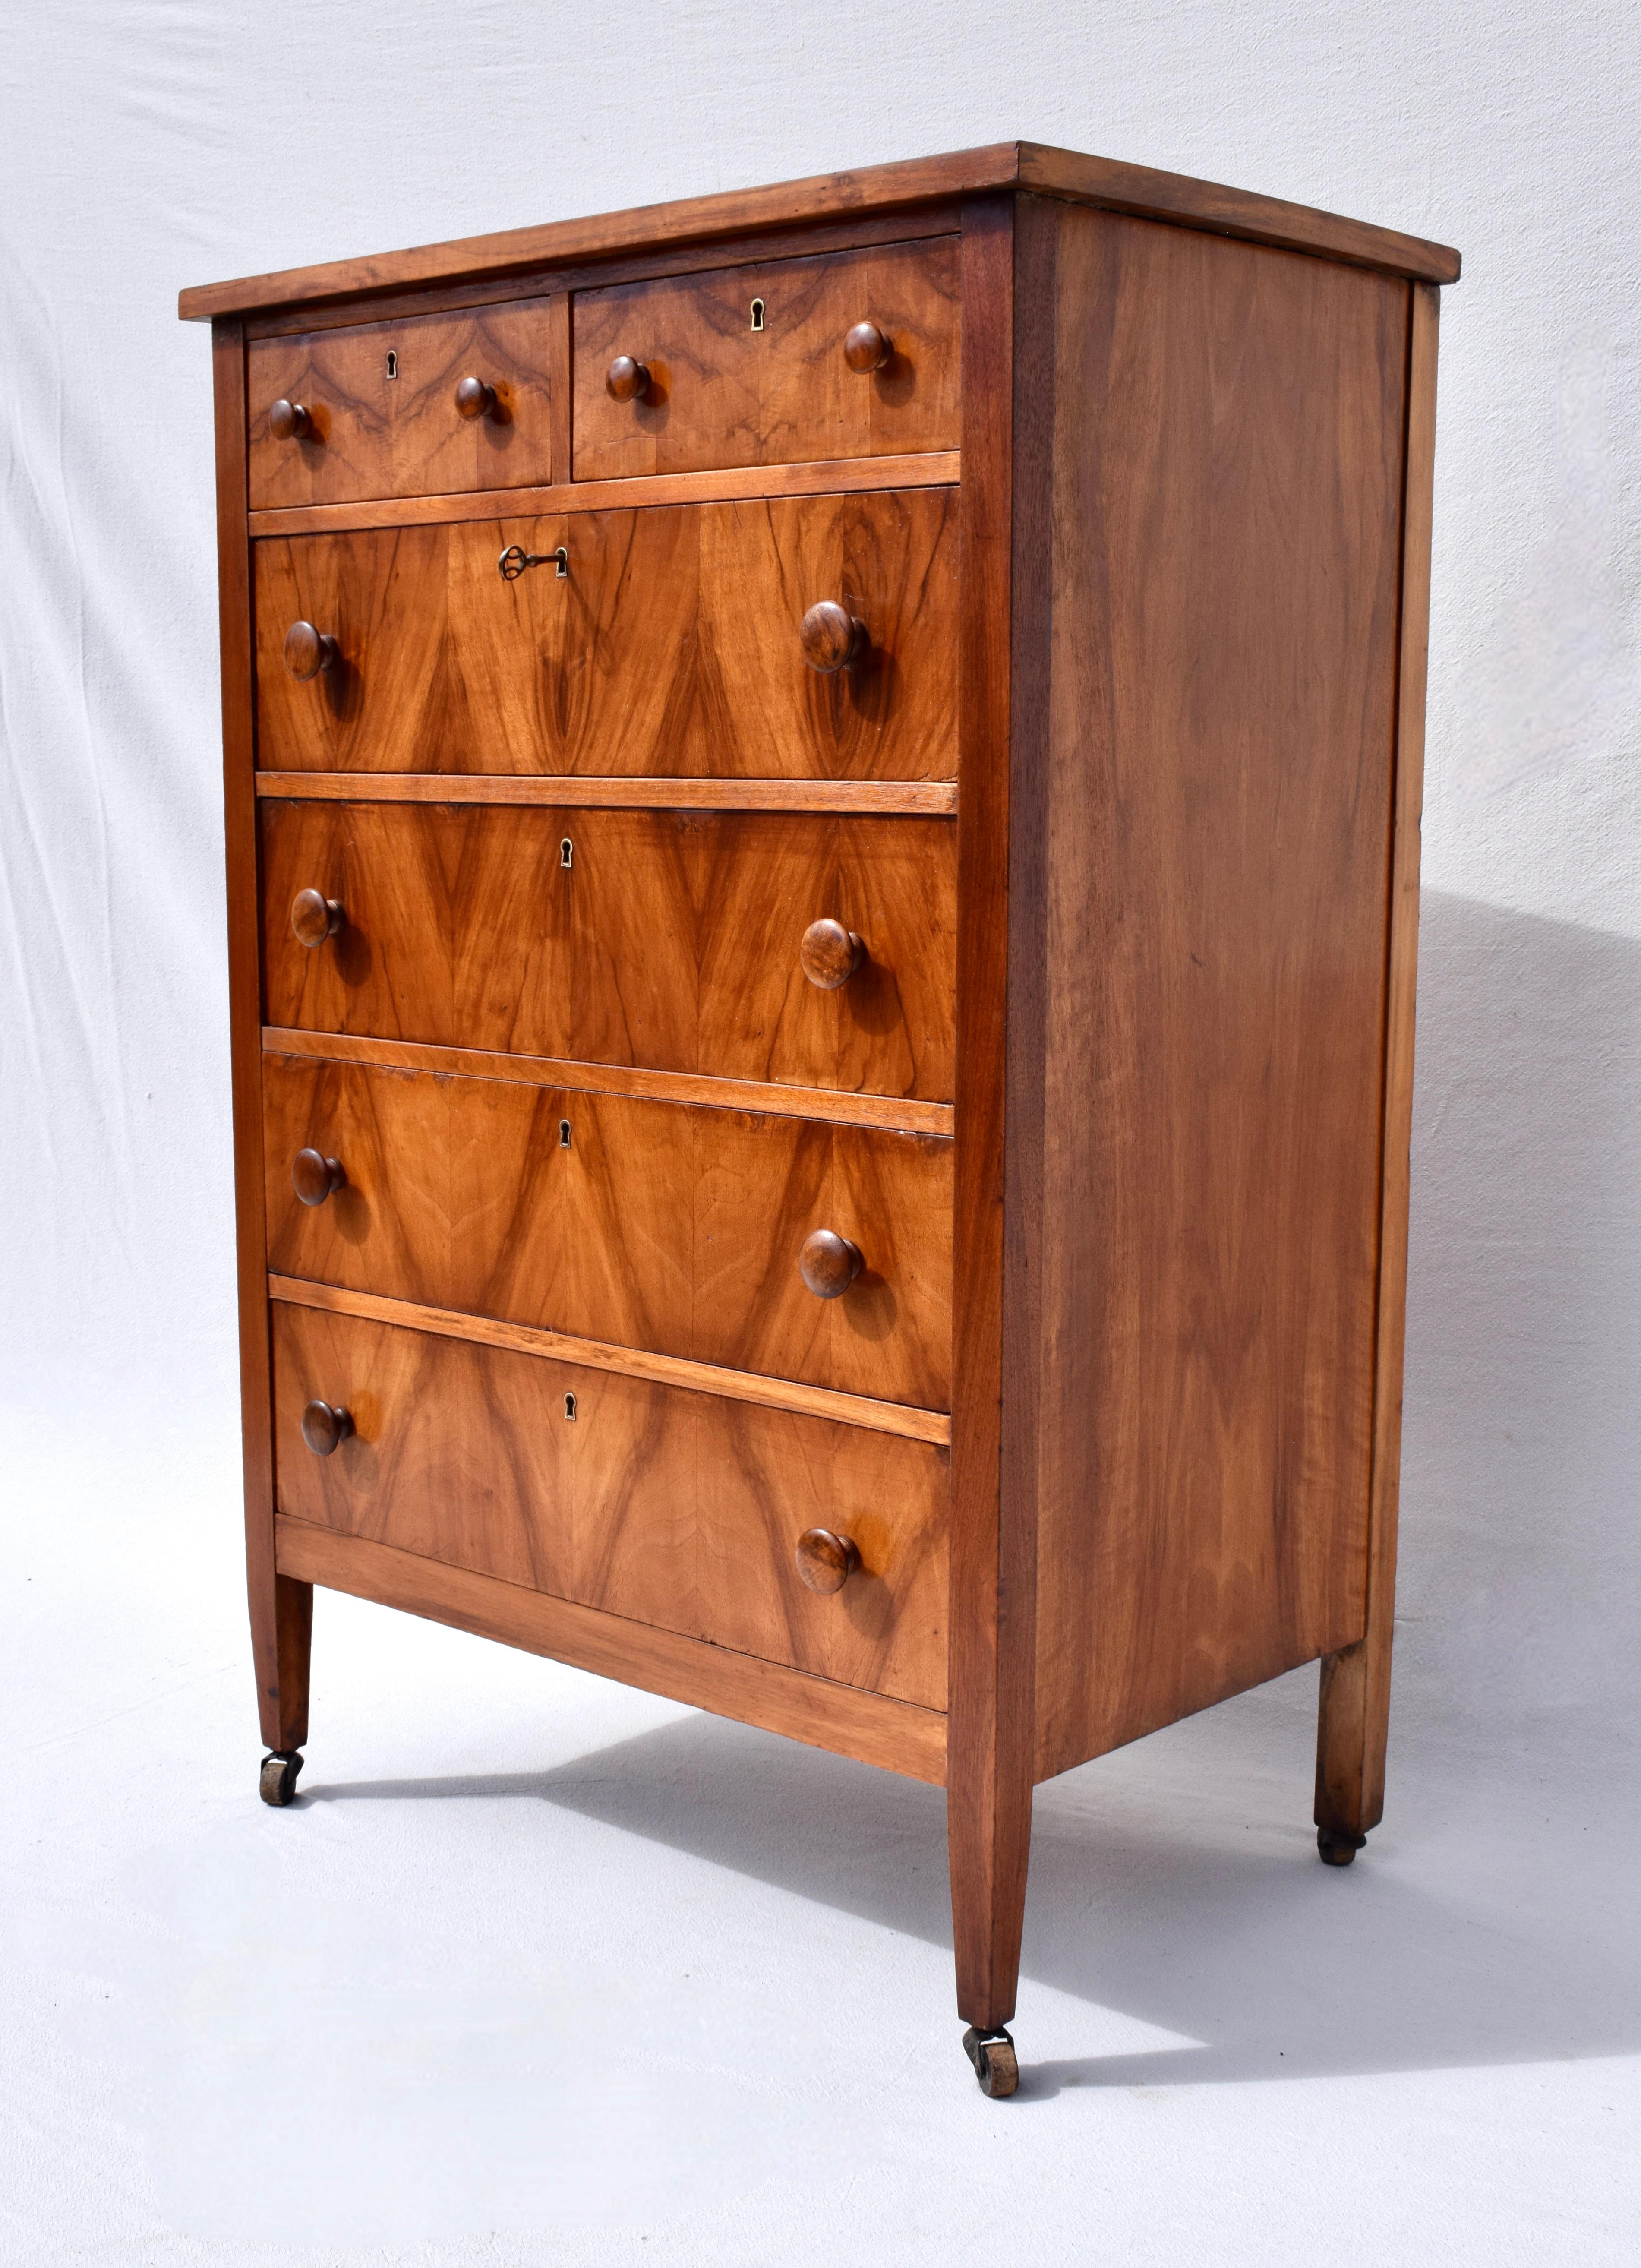 A mid sized highboy chest of six drawers boasting an impressive show of book matched flame Mahogany wood grains with working locks on all drawers and key. Fully refinished, the chest is quite substantial and solid perched on original casters.